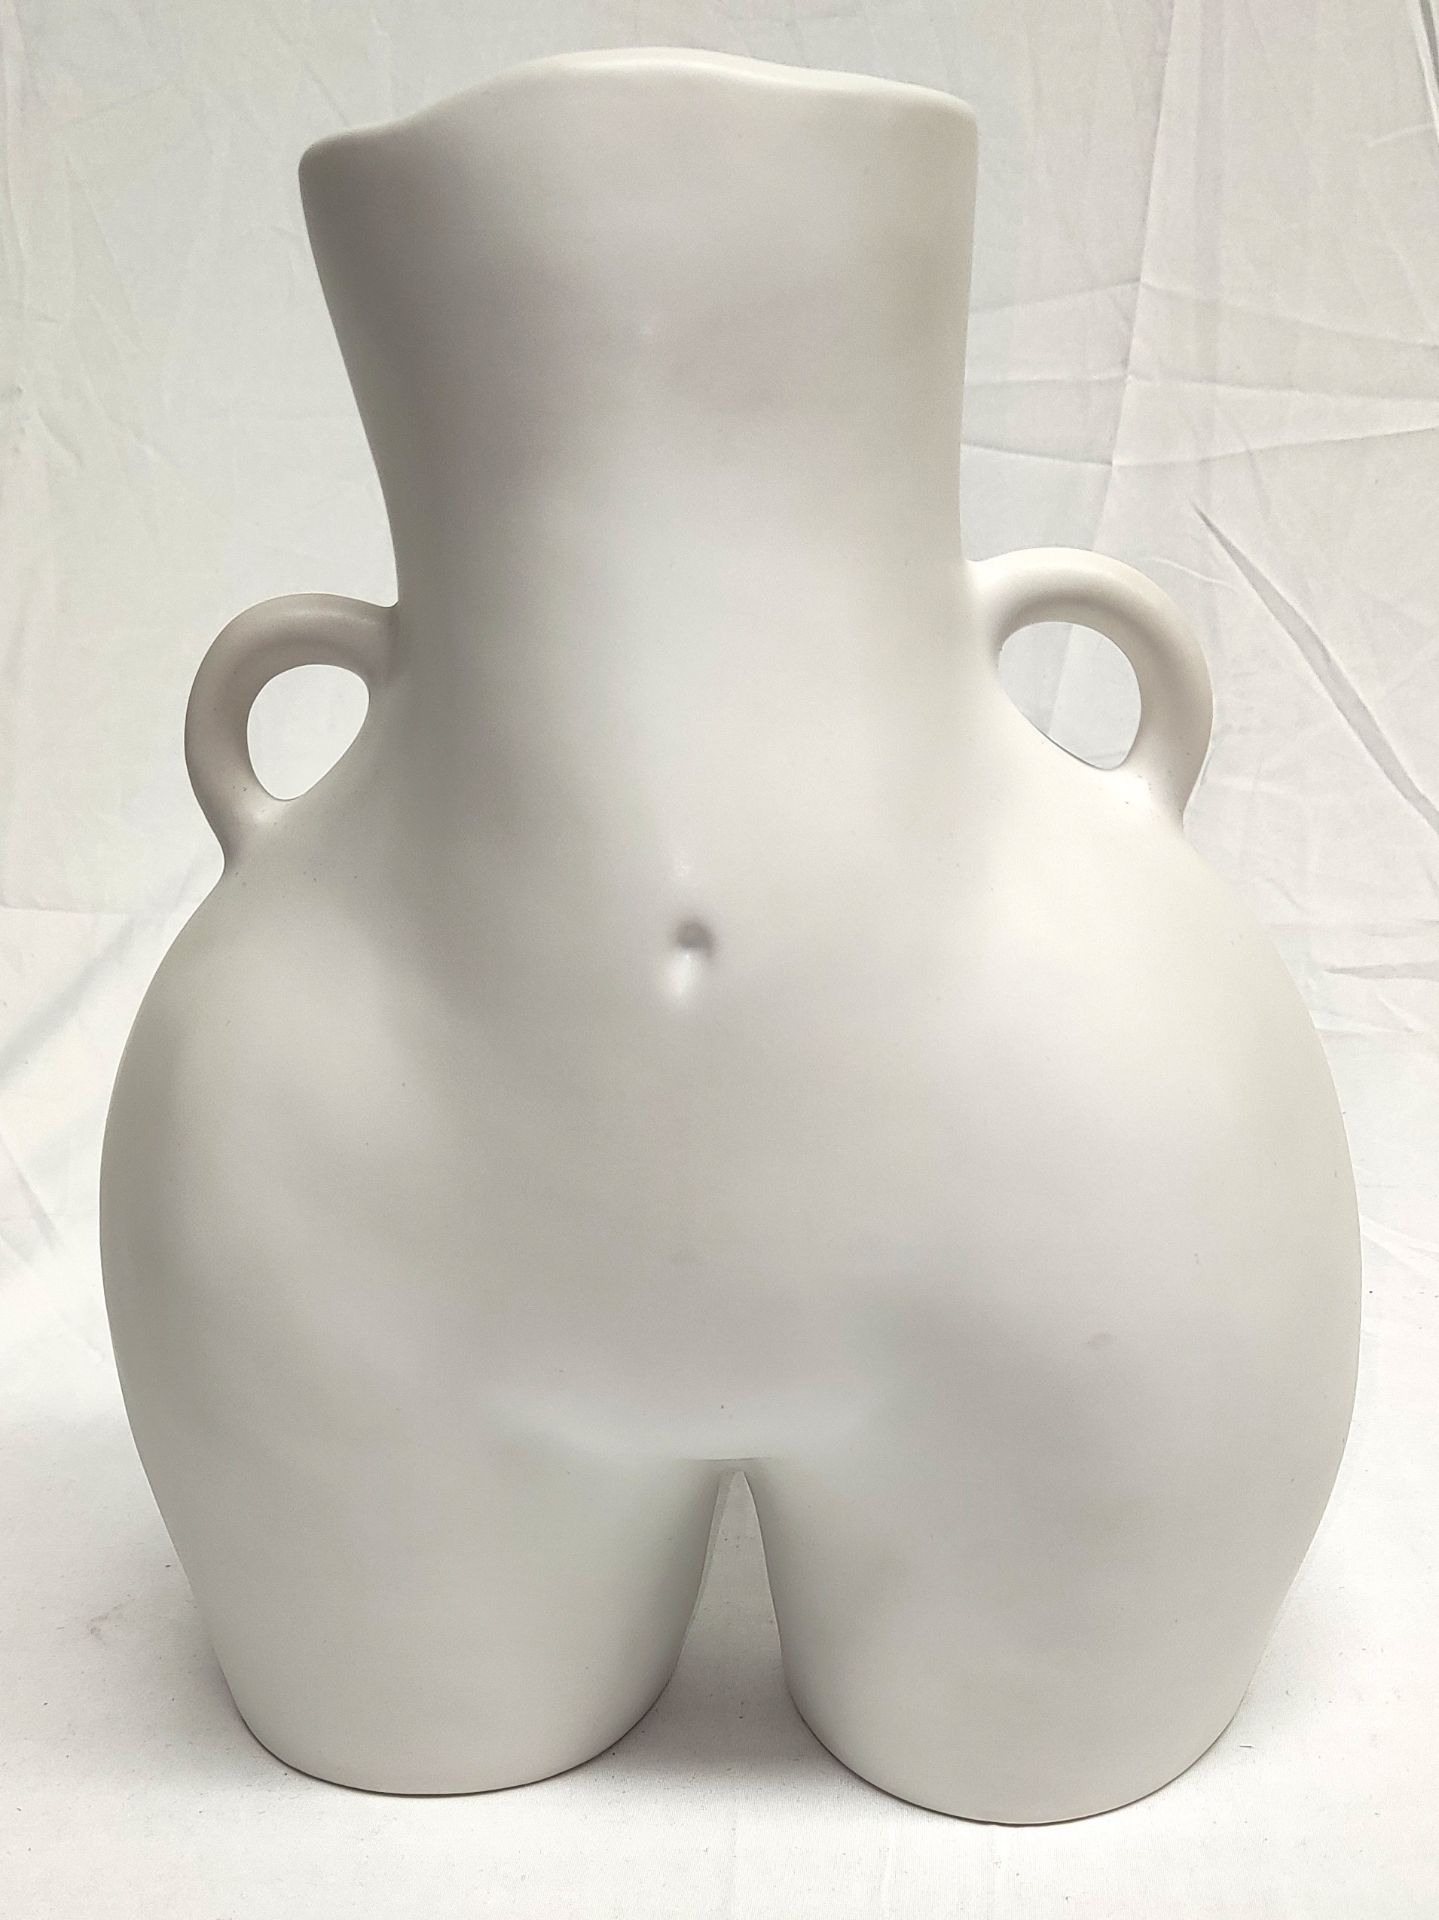 1 x ANISSA KERMICHE Love Handles Vase In White - Boxed - Original RRP £340 - Ref: 6787060/HJL382/ - Image 2 of 16